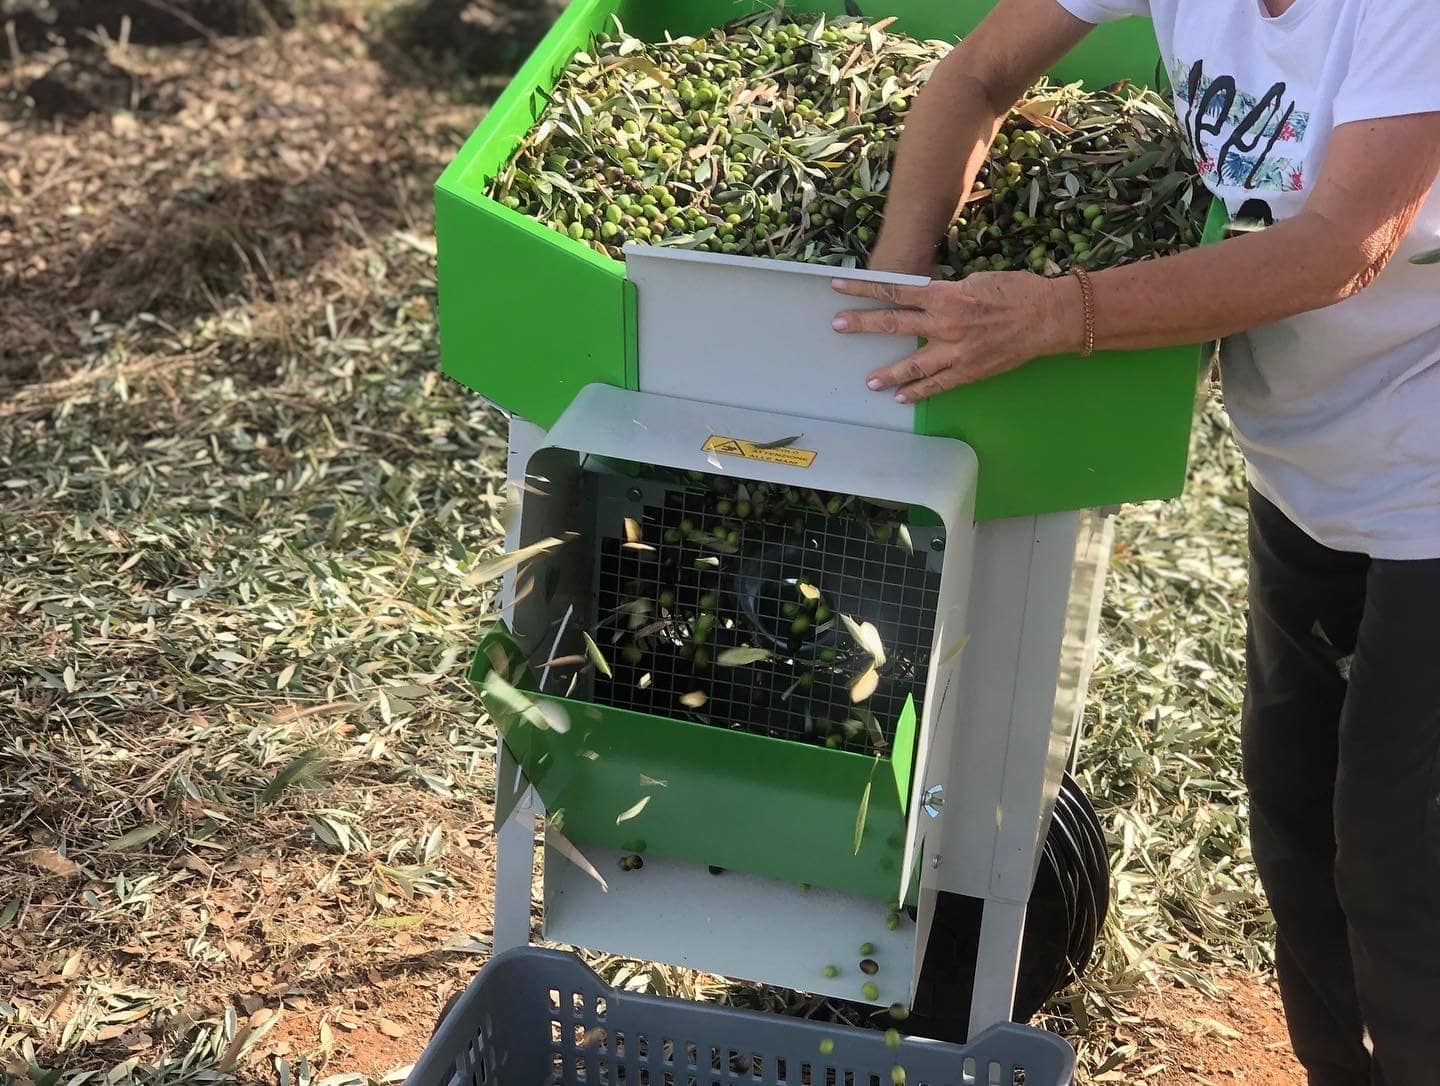 europe-the-best-olive-oils-competitions-production-in-portugal-a-tough-season-ends-with-stronger-determination-olive-oil-times